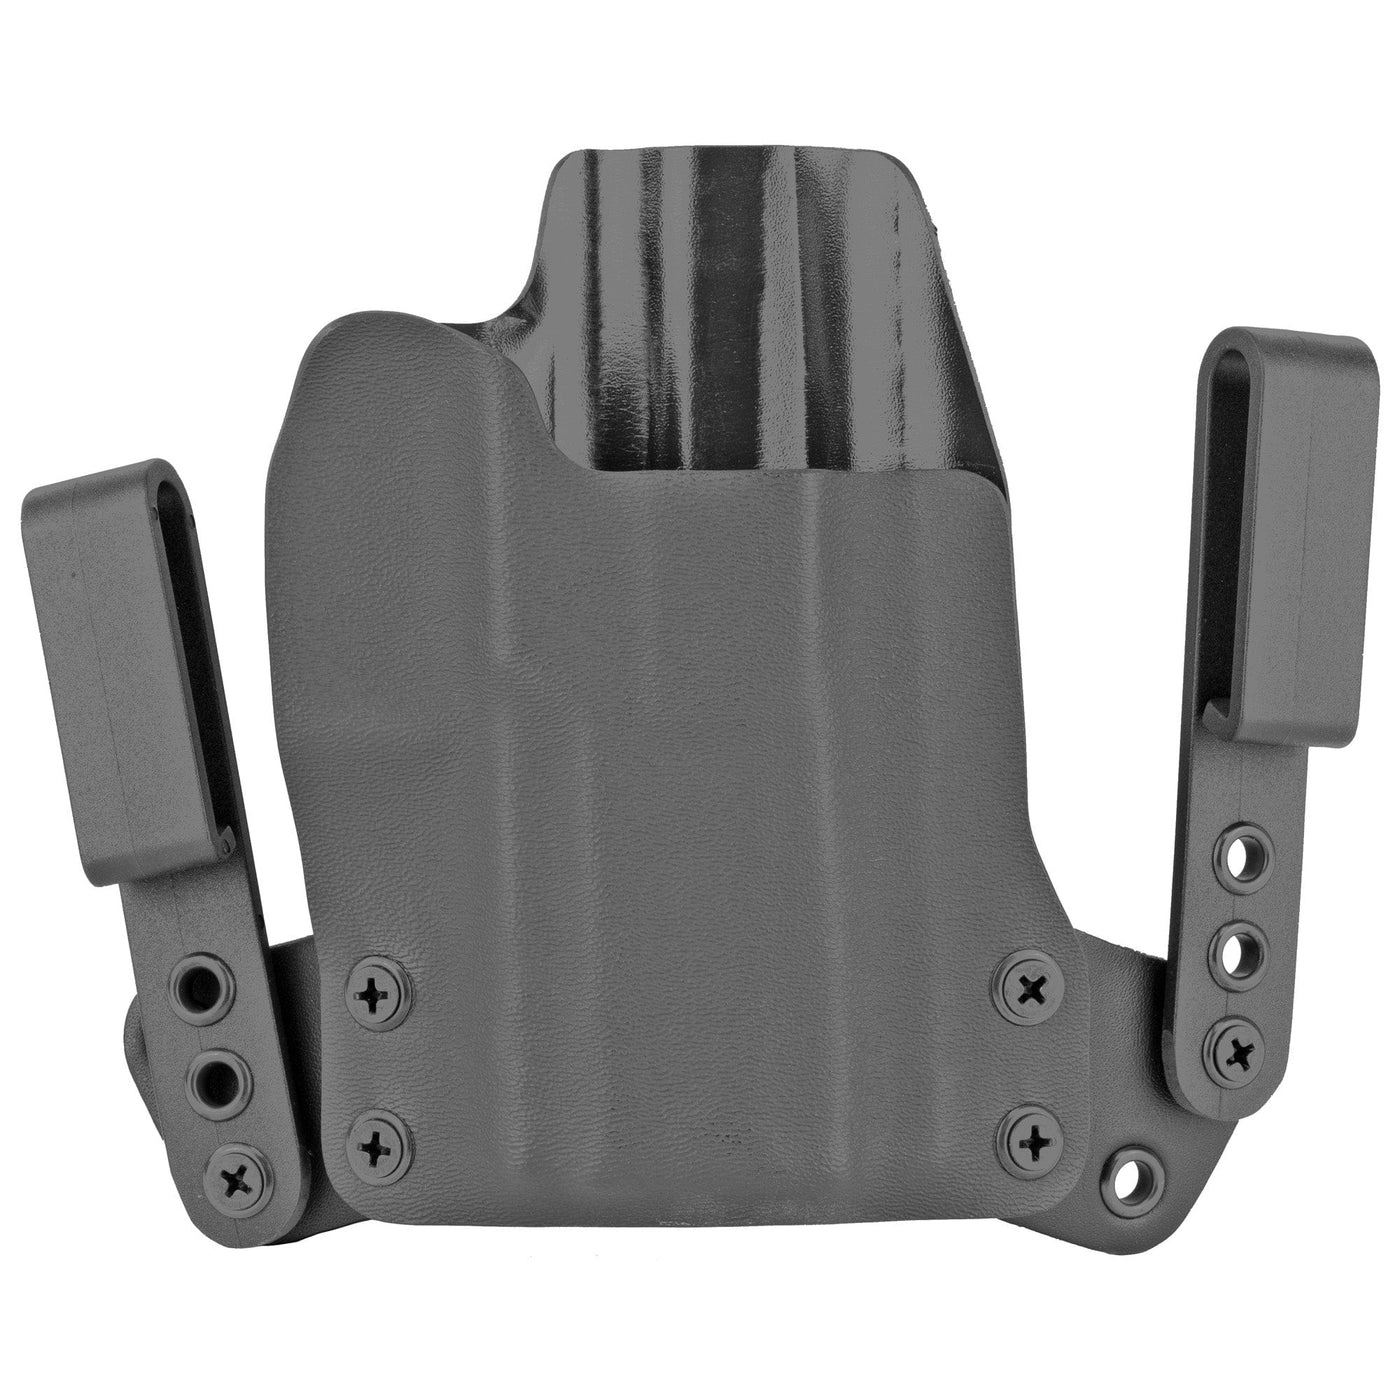 BlackPoint Tactical Blk Pnt Mini Wing P320 X-carry Rh Bk Holsters